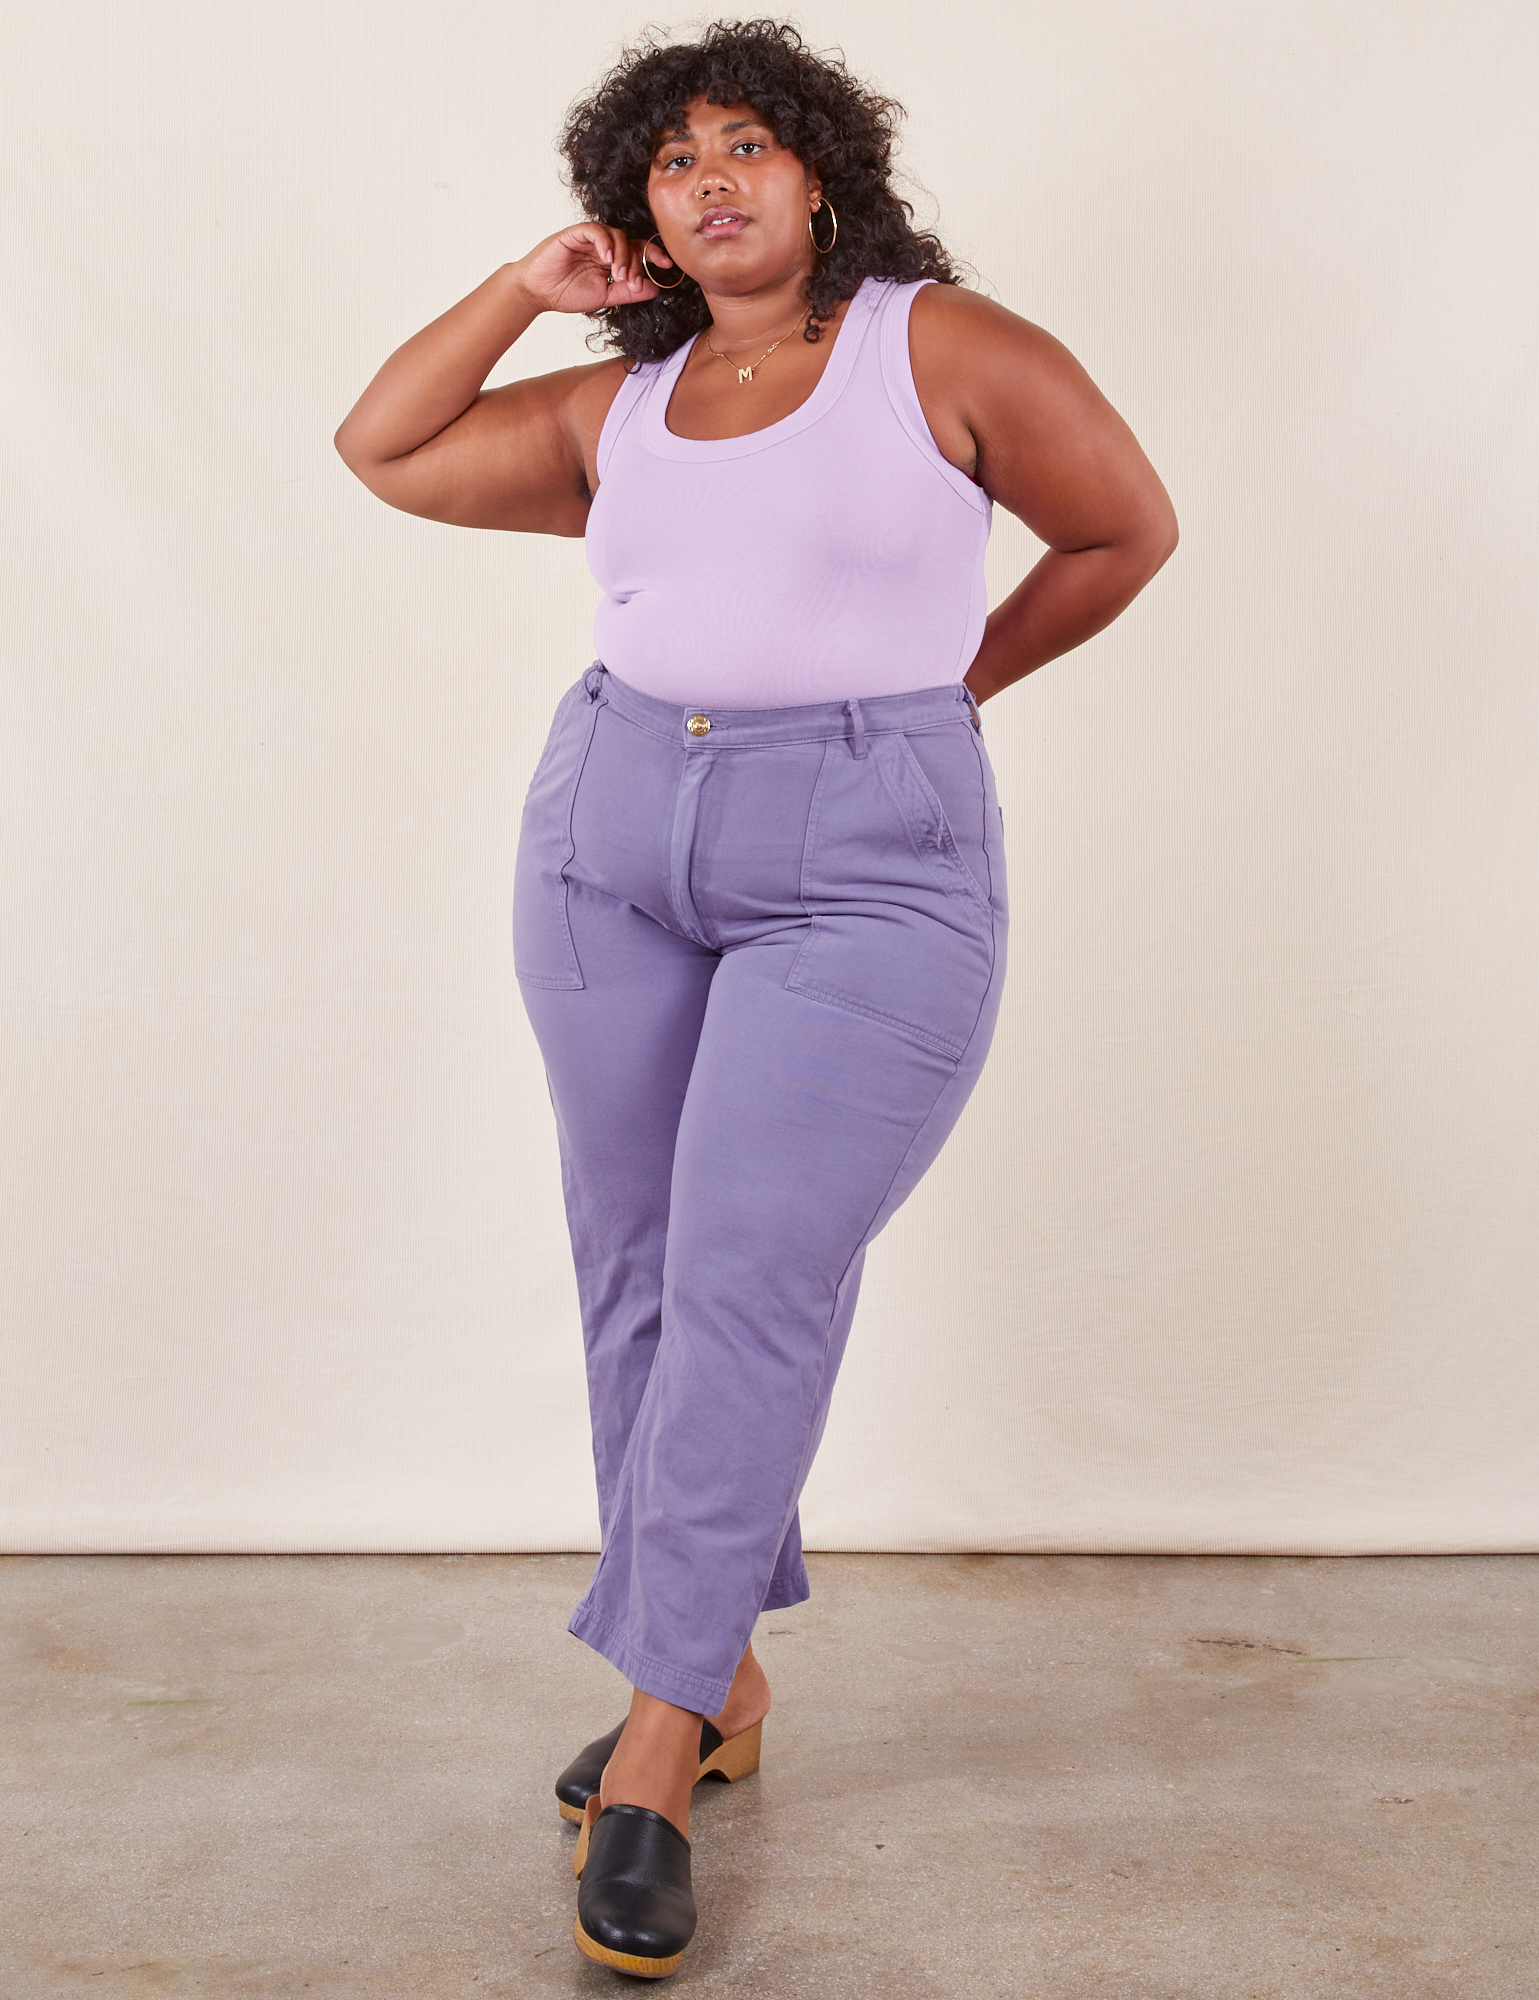 Morgan is 5&#39;5&quot; and wearing Petite 1XL Work Pants in Faded Grape paired with lilac purple Tank Top